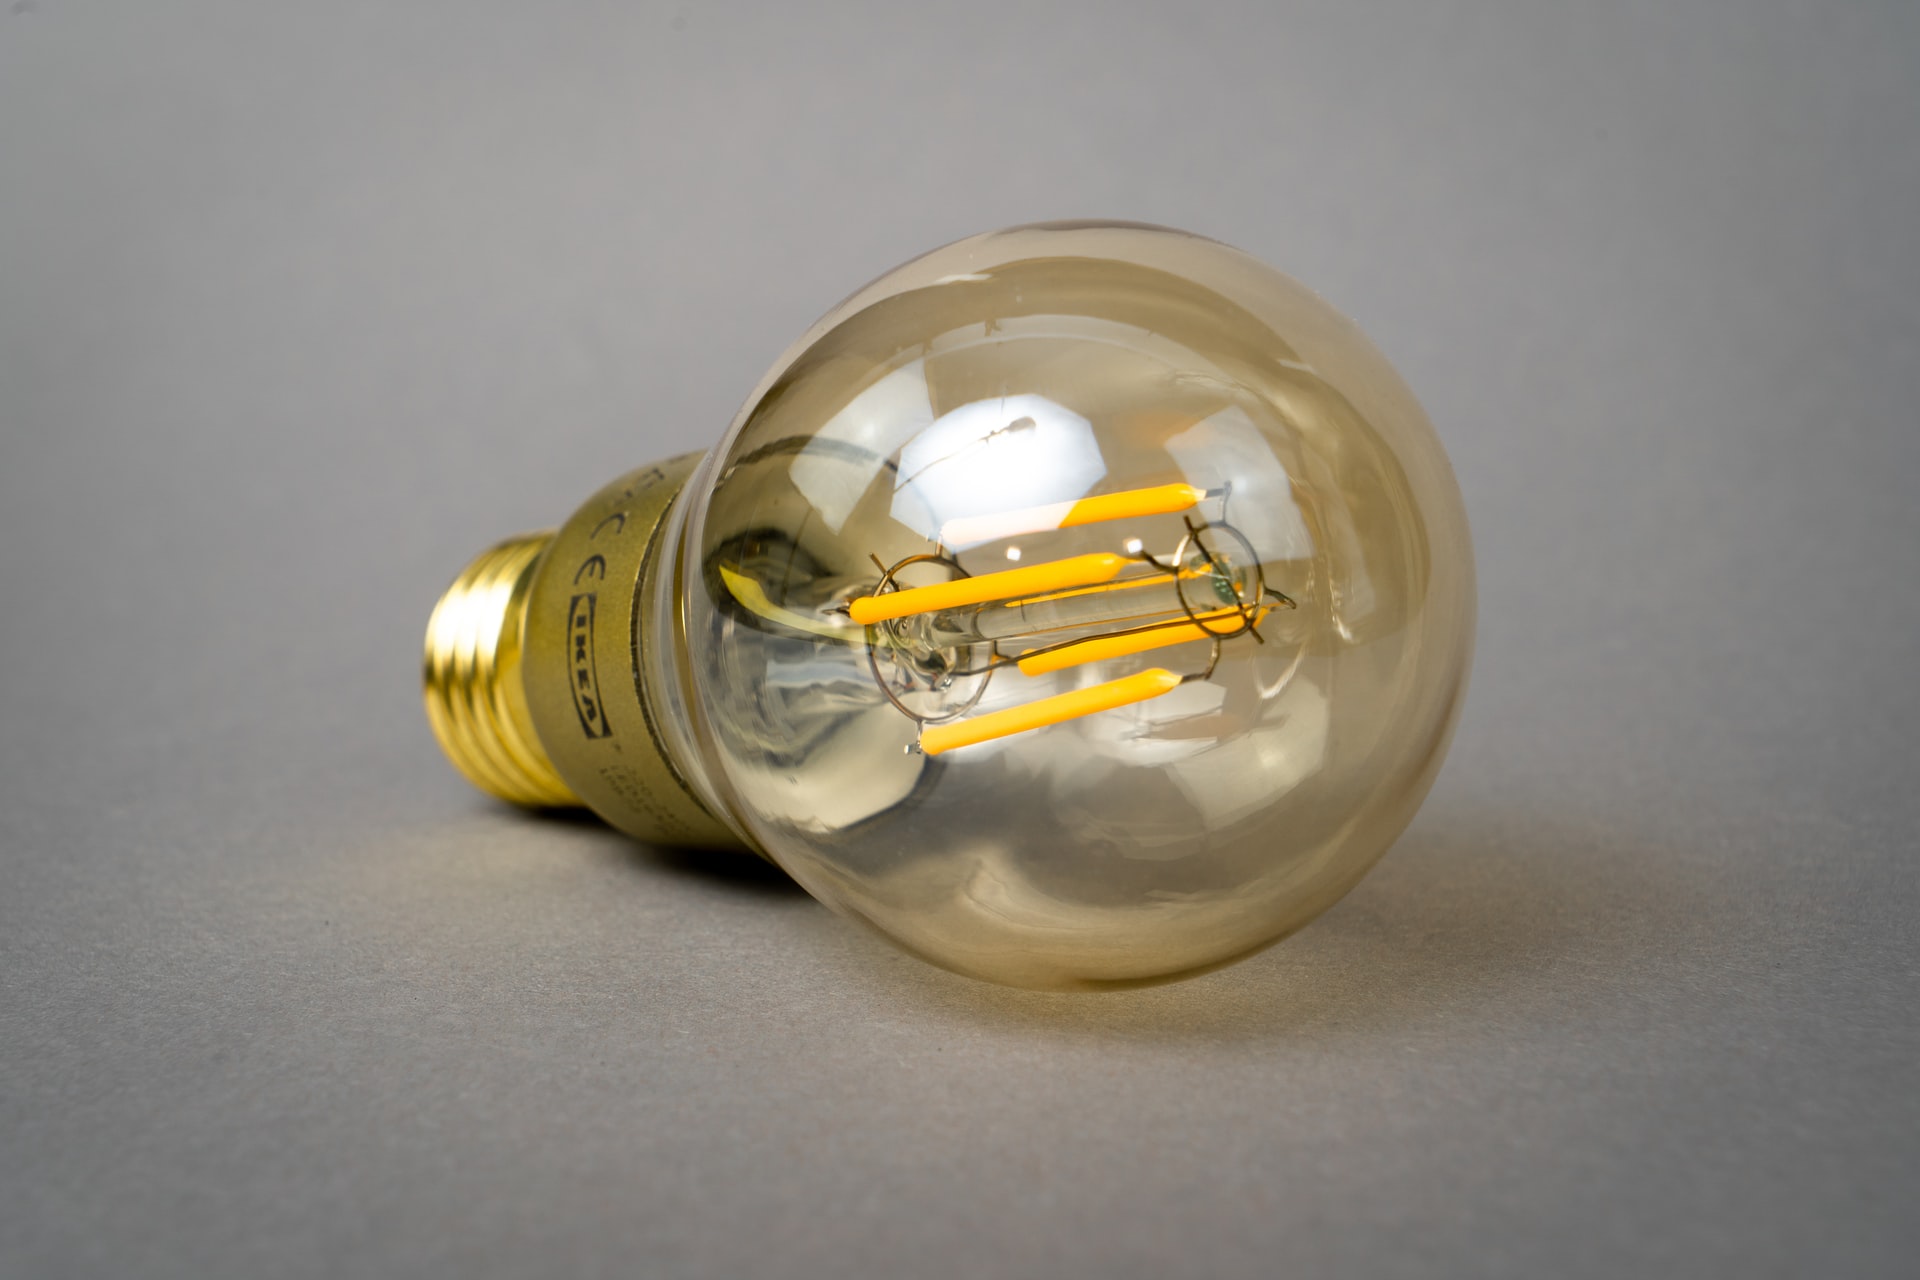 How to dispose of led light bulbs